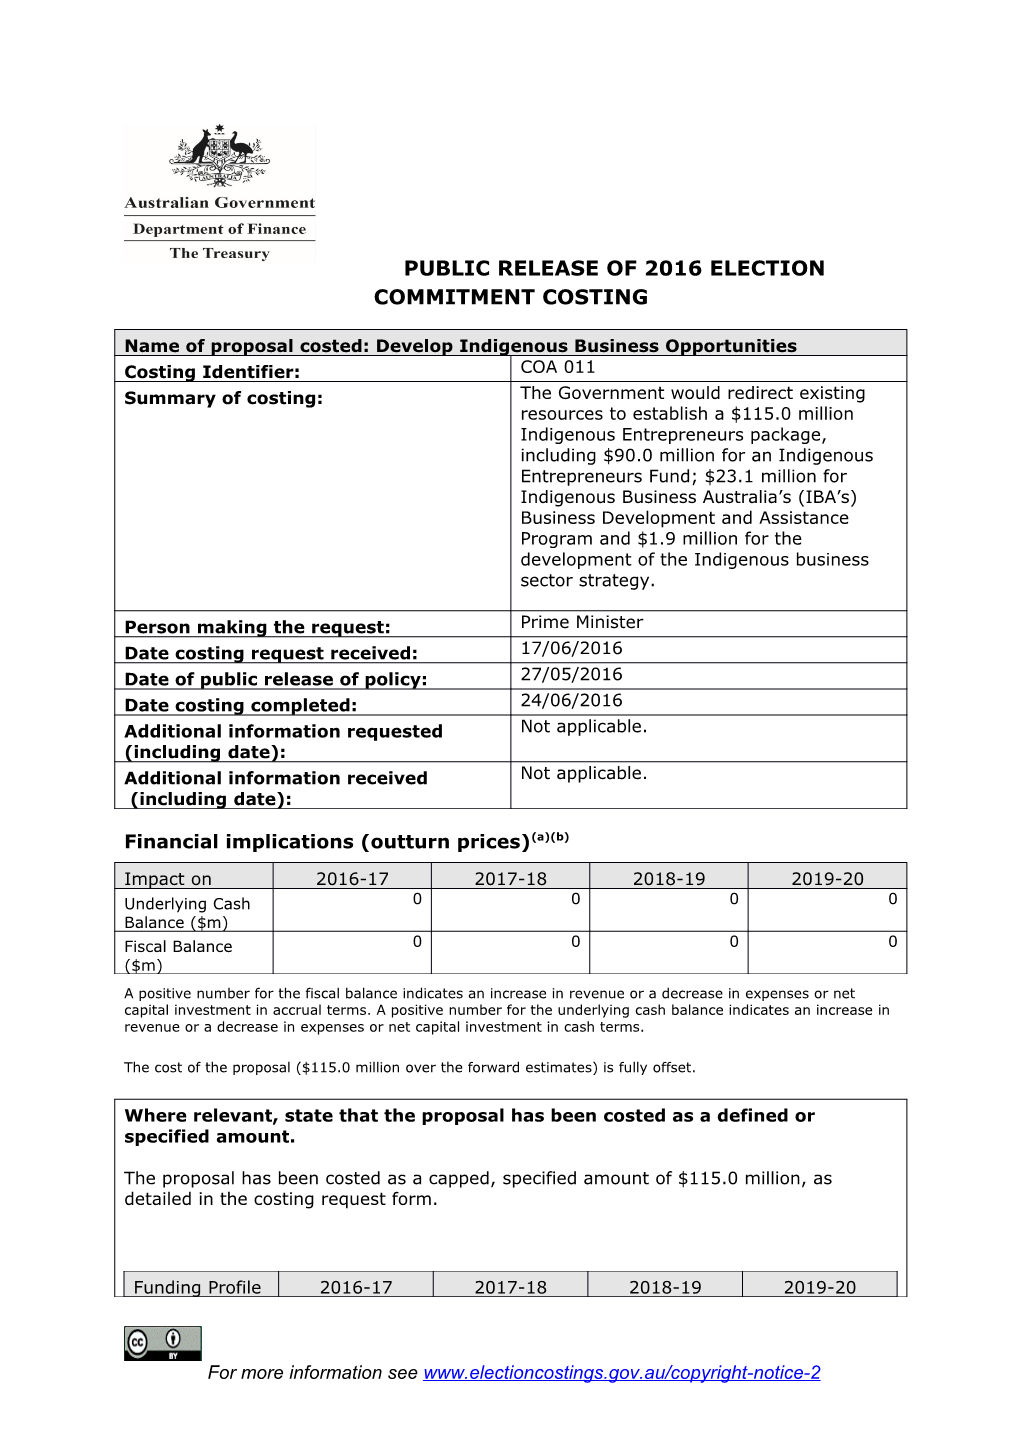 Public Release of 2016 Election Commitment Costing